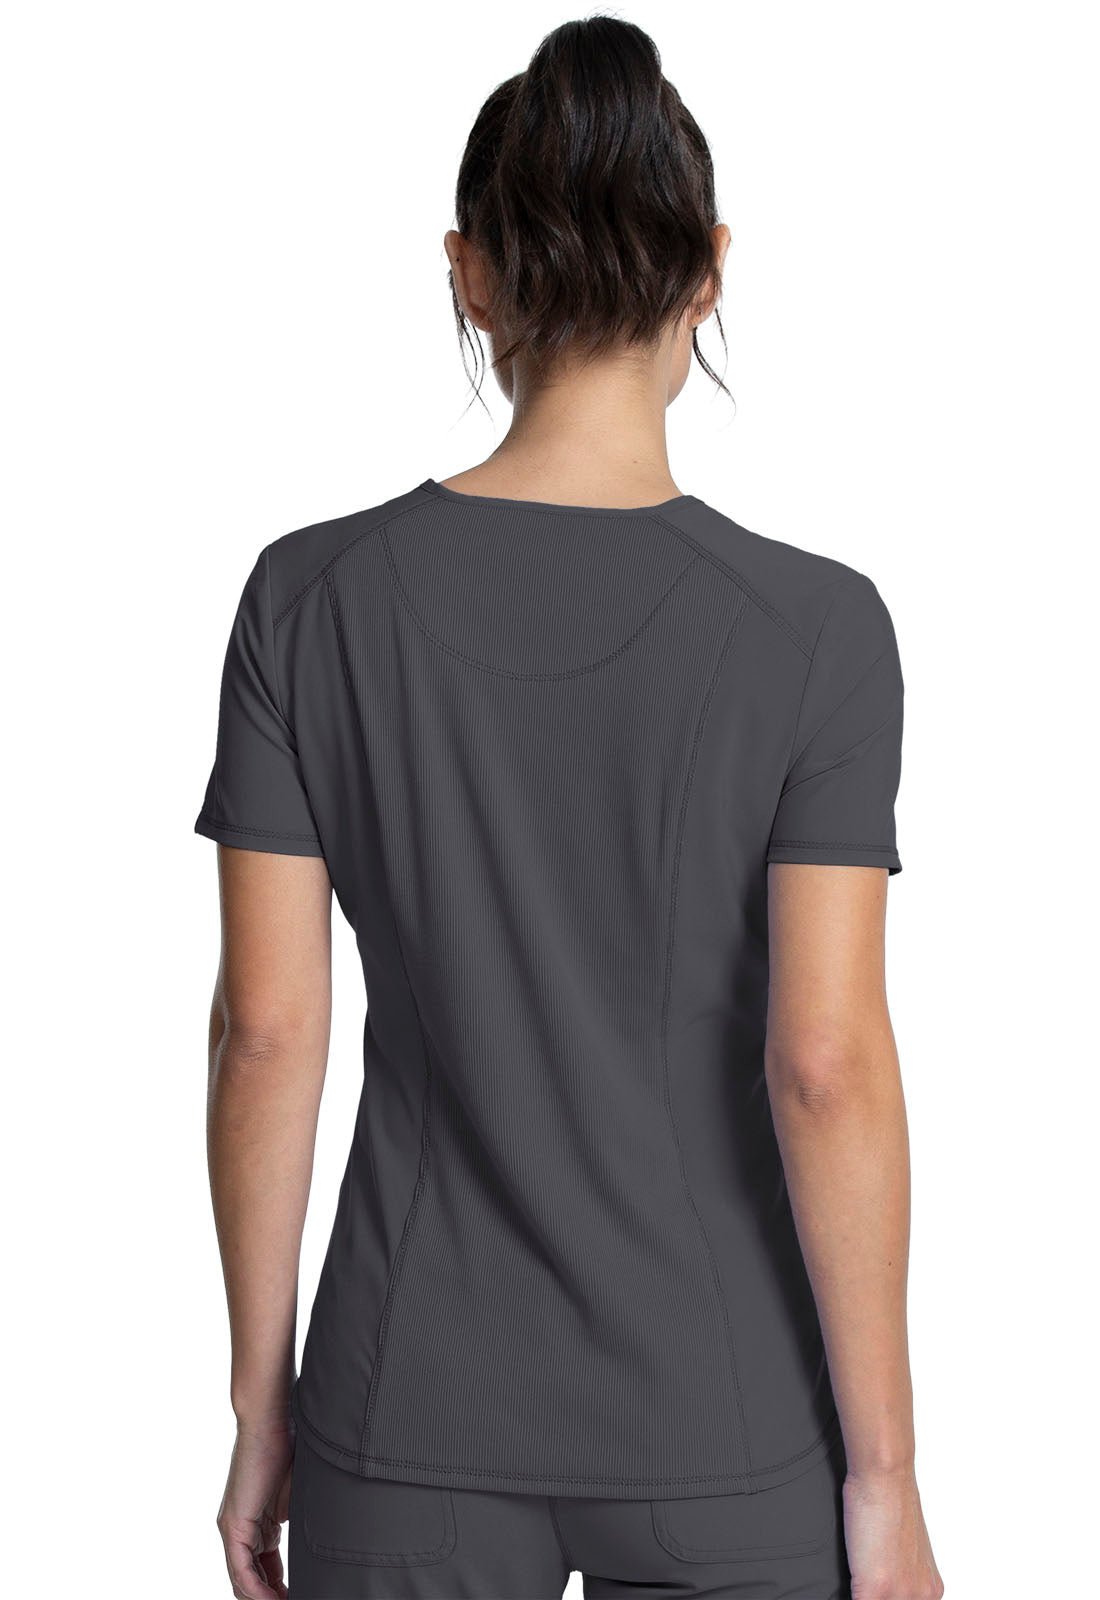 Pewter Infinity Scrubs Tuckable V-Neck Top- Back View